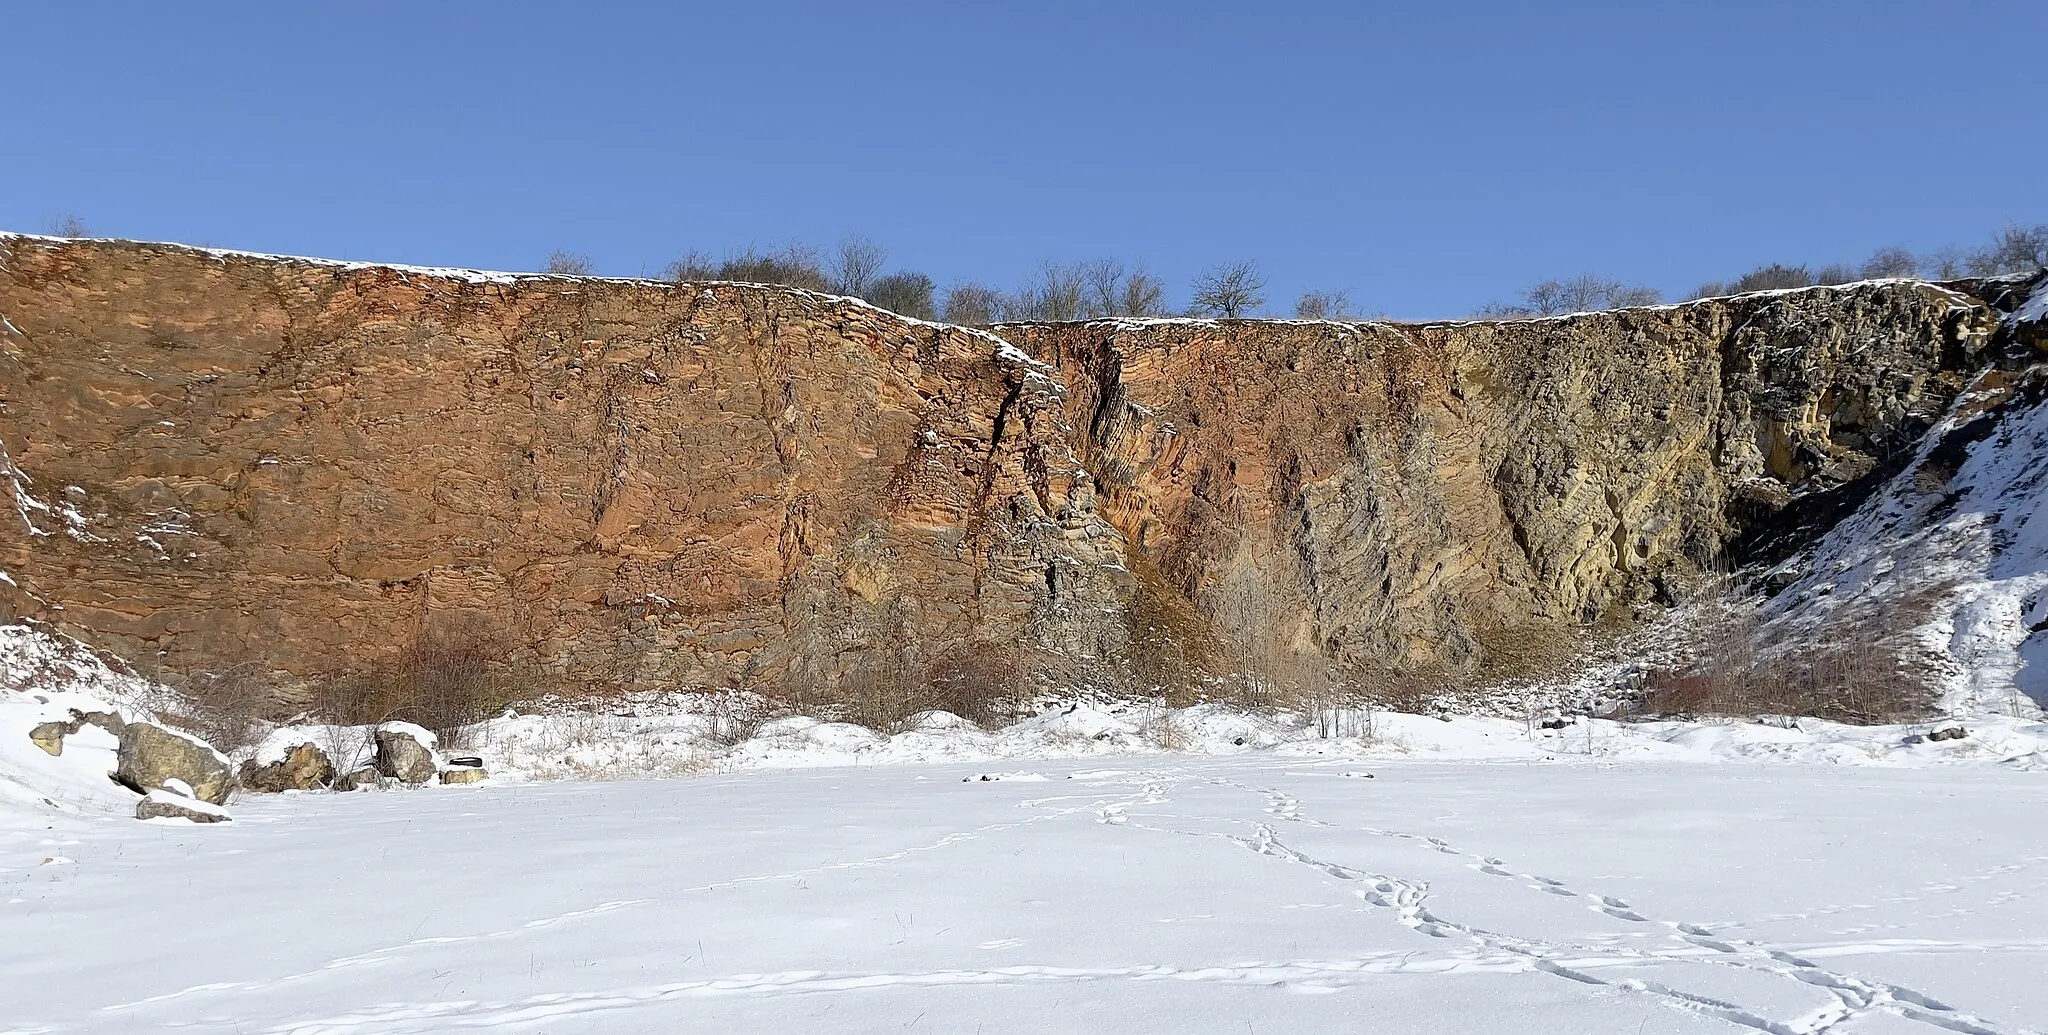 Photo showing: A limestone quarry. Somewhere in this rock face lies the prag/lochkov boundary within the Devonian period. Whether it follows the colour change, I can't tell for sure. The layers have been twisted during the Variscan orogeny.